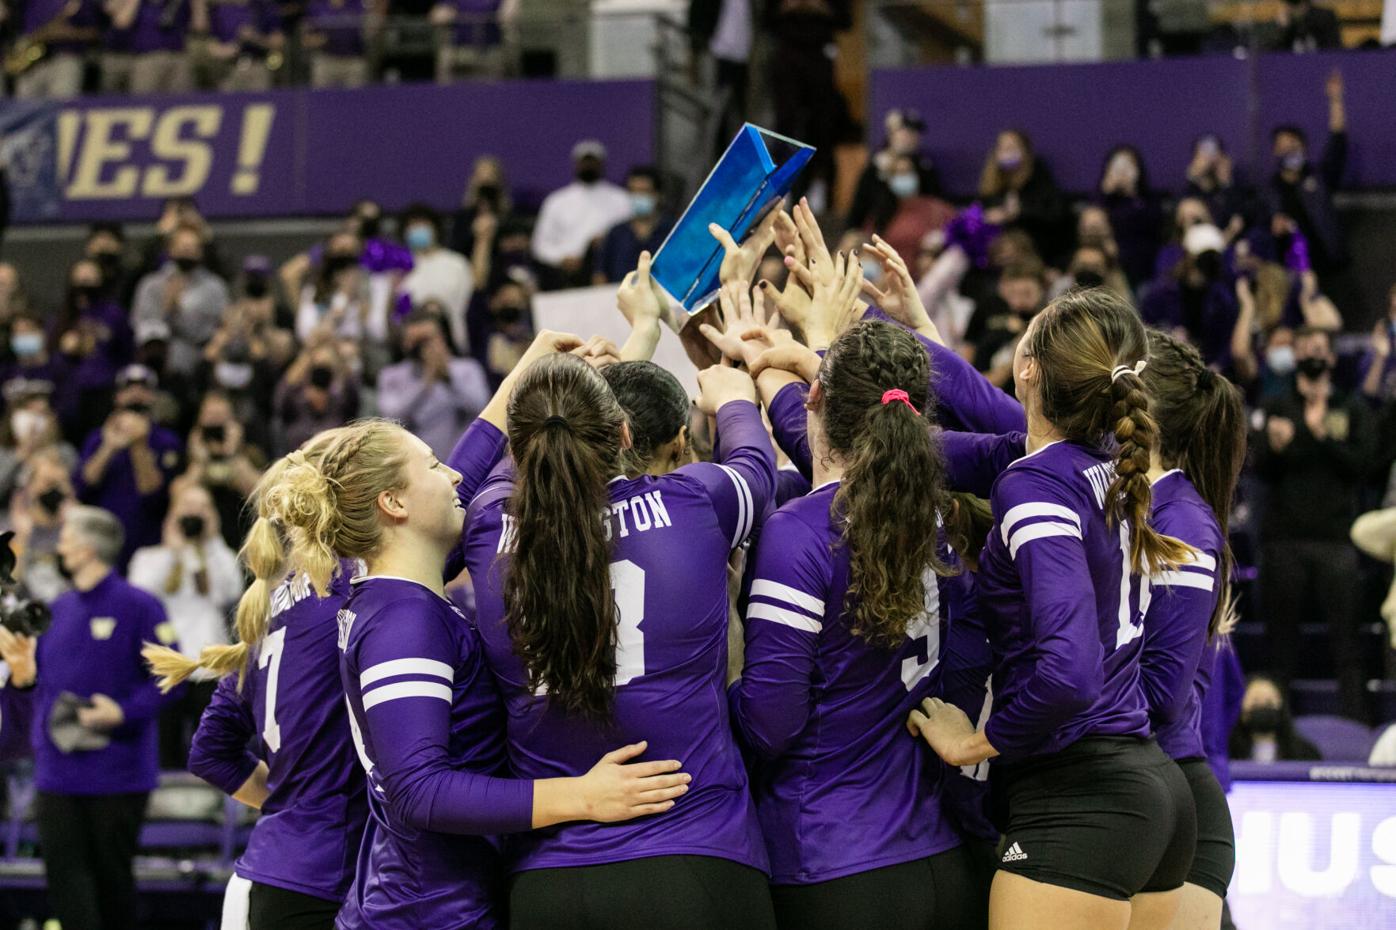 Huskies take down Cougars to win second consecutive Pac-12 title